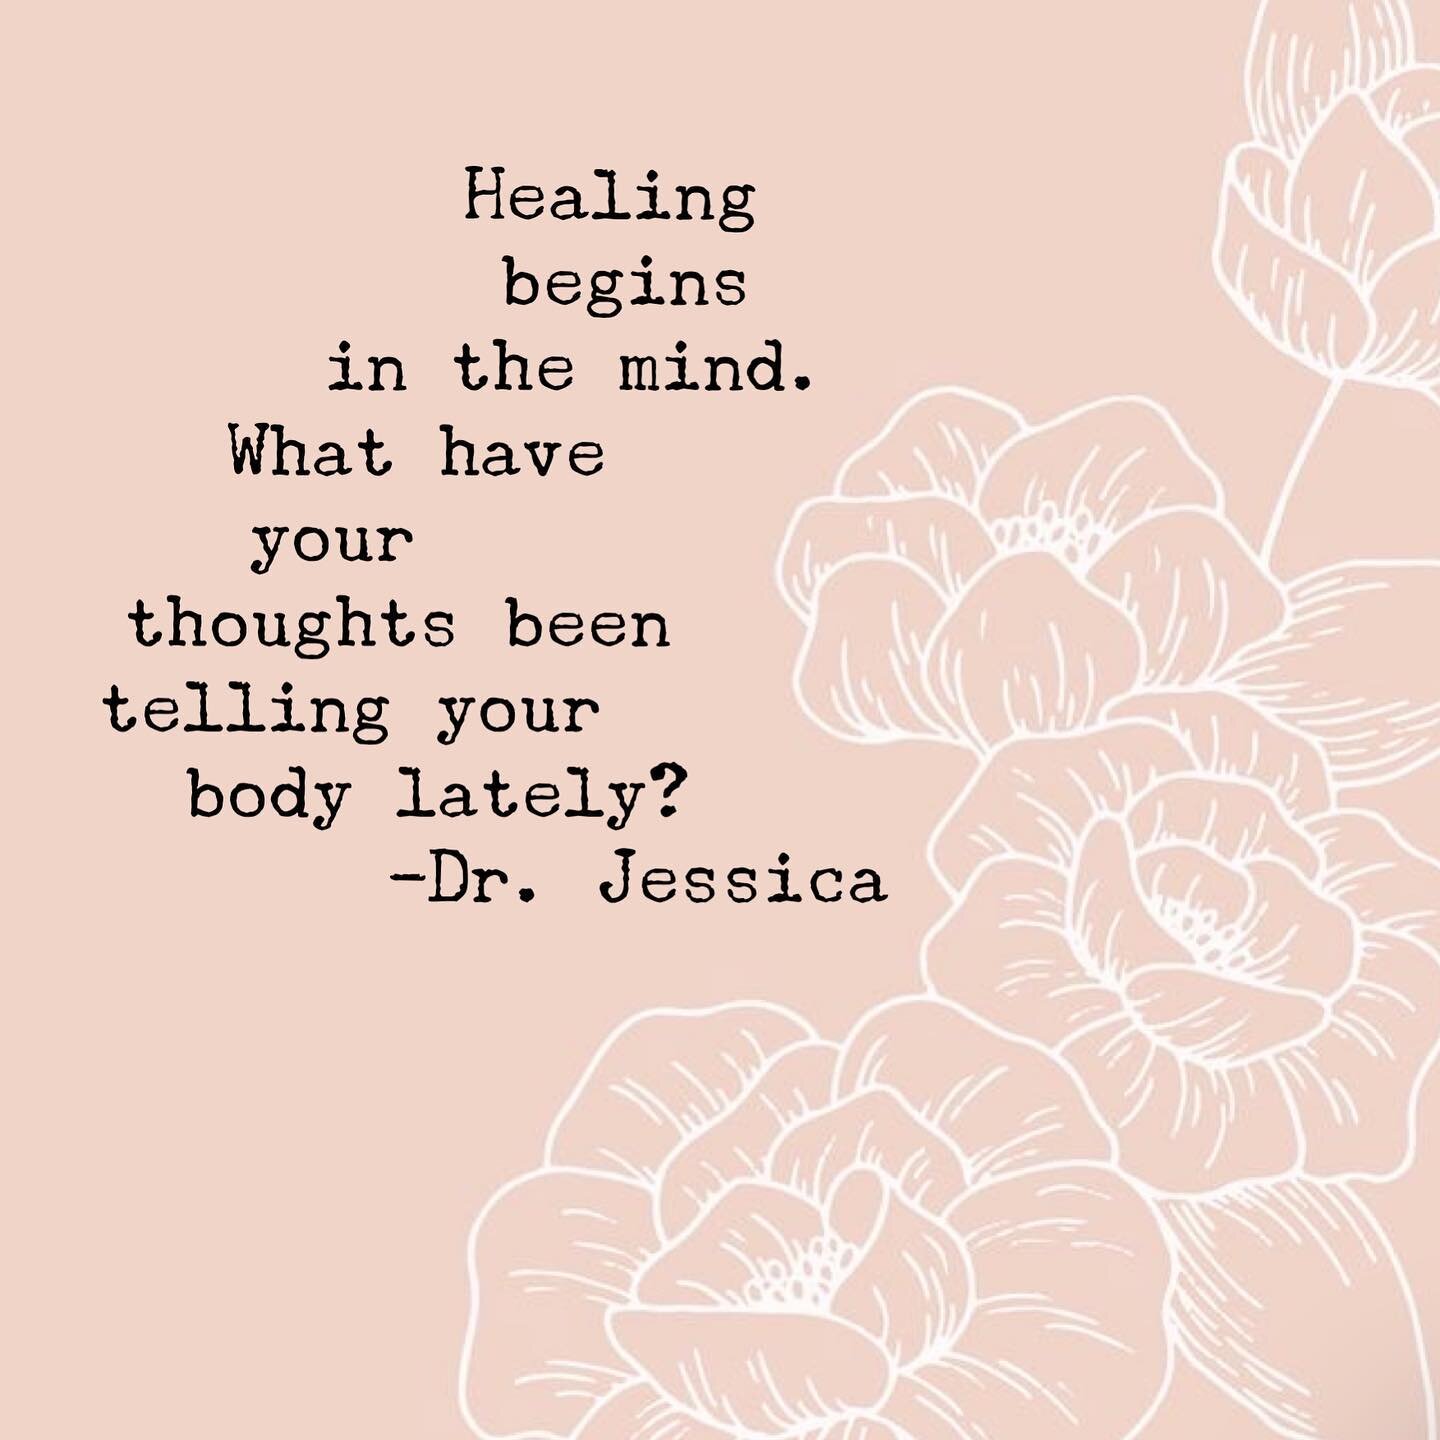 H E A L I N G // begins in the mind. What thoughts have been swirling around in your head lately? 
.
Did you know that we can consciously change those thoughts? 
.
.
☀️First - notice your thoughts (be the observer of your own thoughts) 
.
☀️Second - 